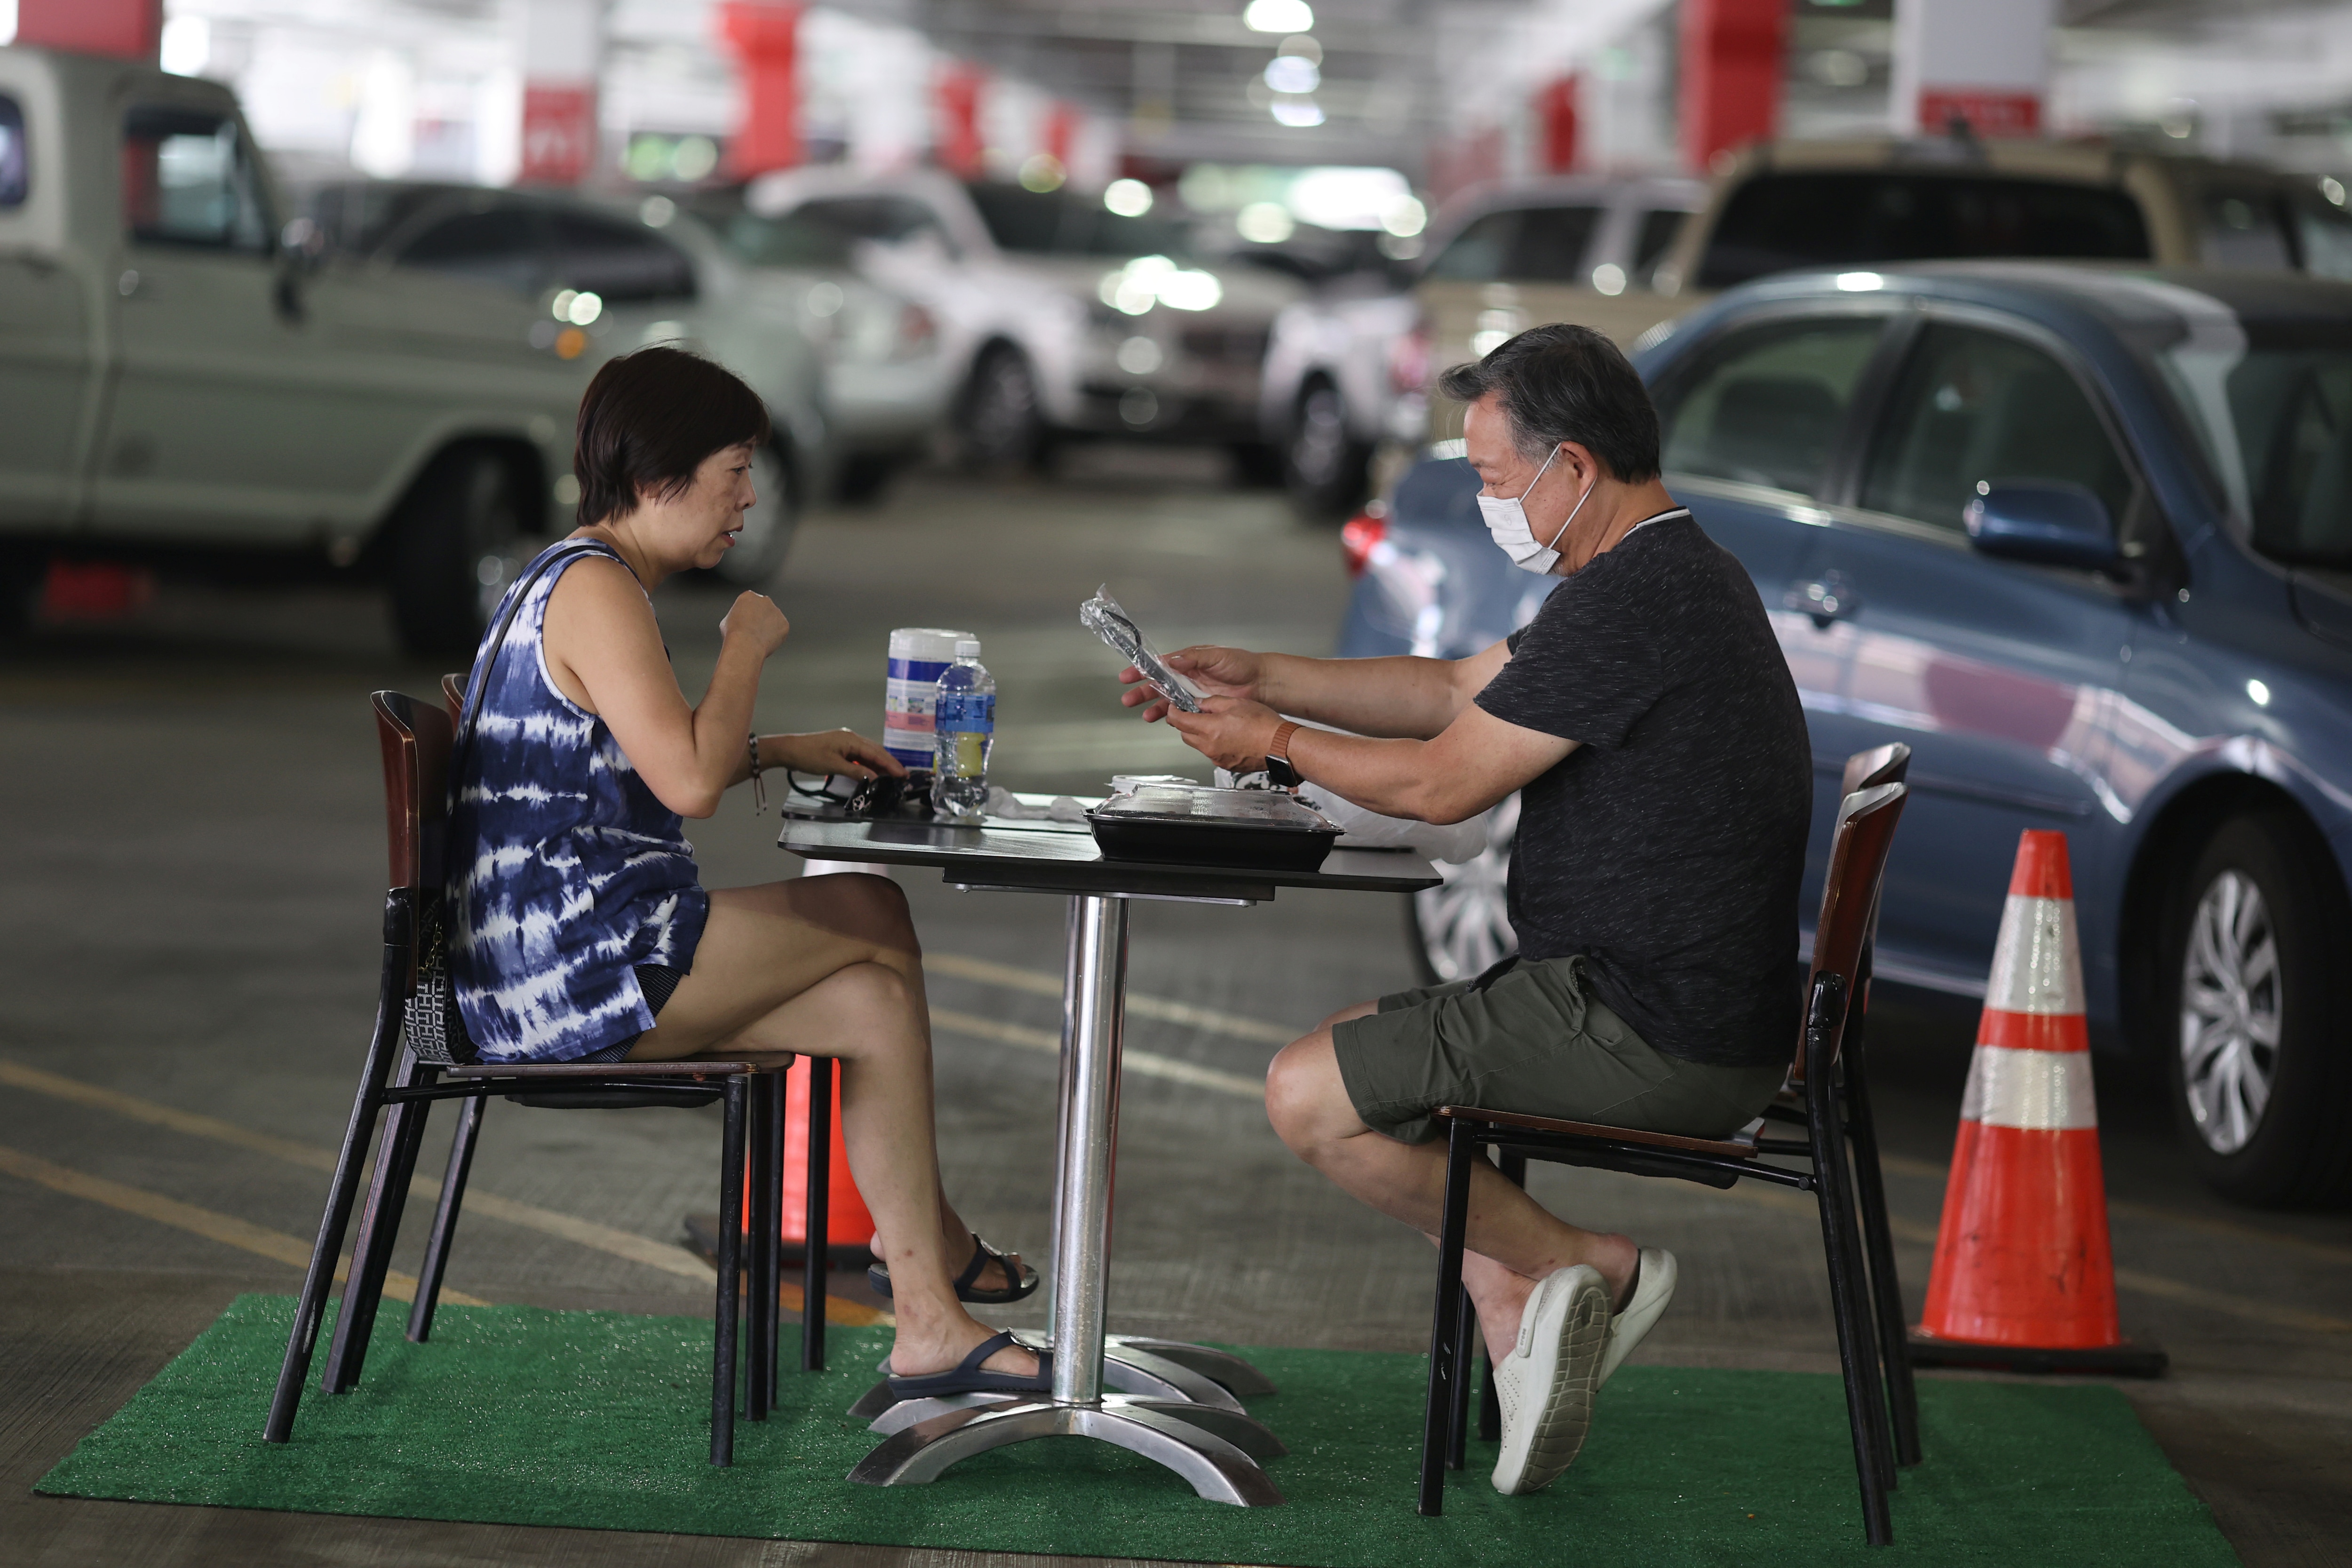 People eat lunch in a dining area set up in the Glendale Galleria mall parking garage.